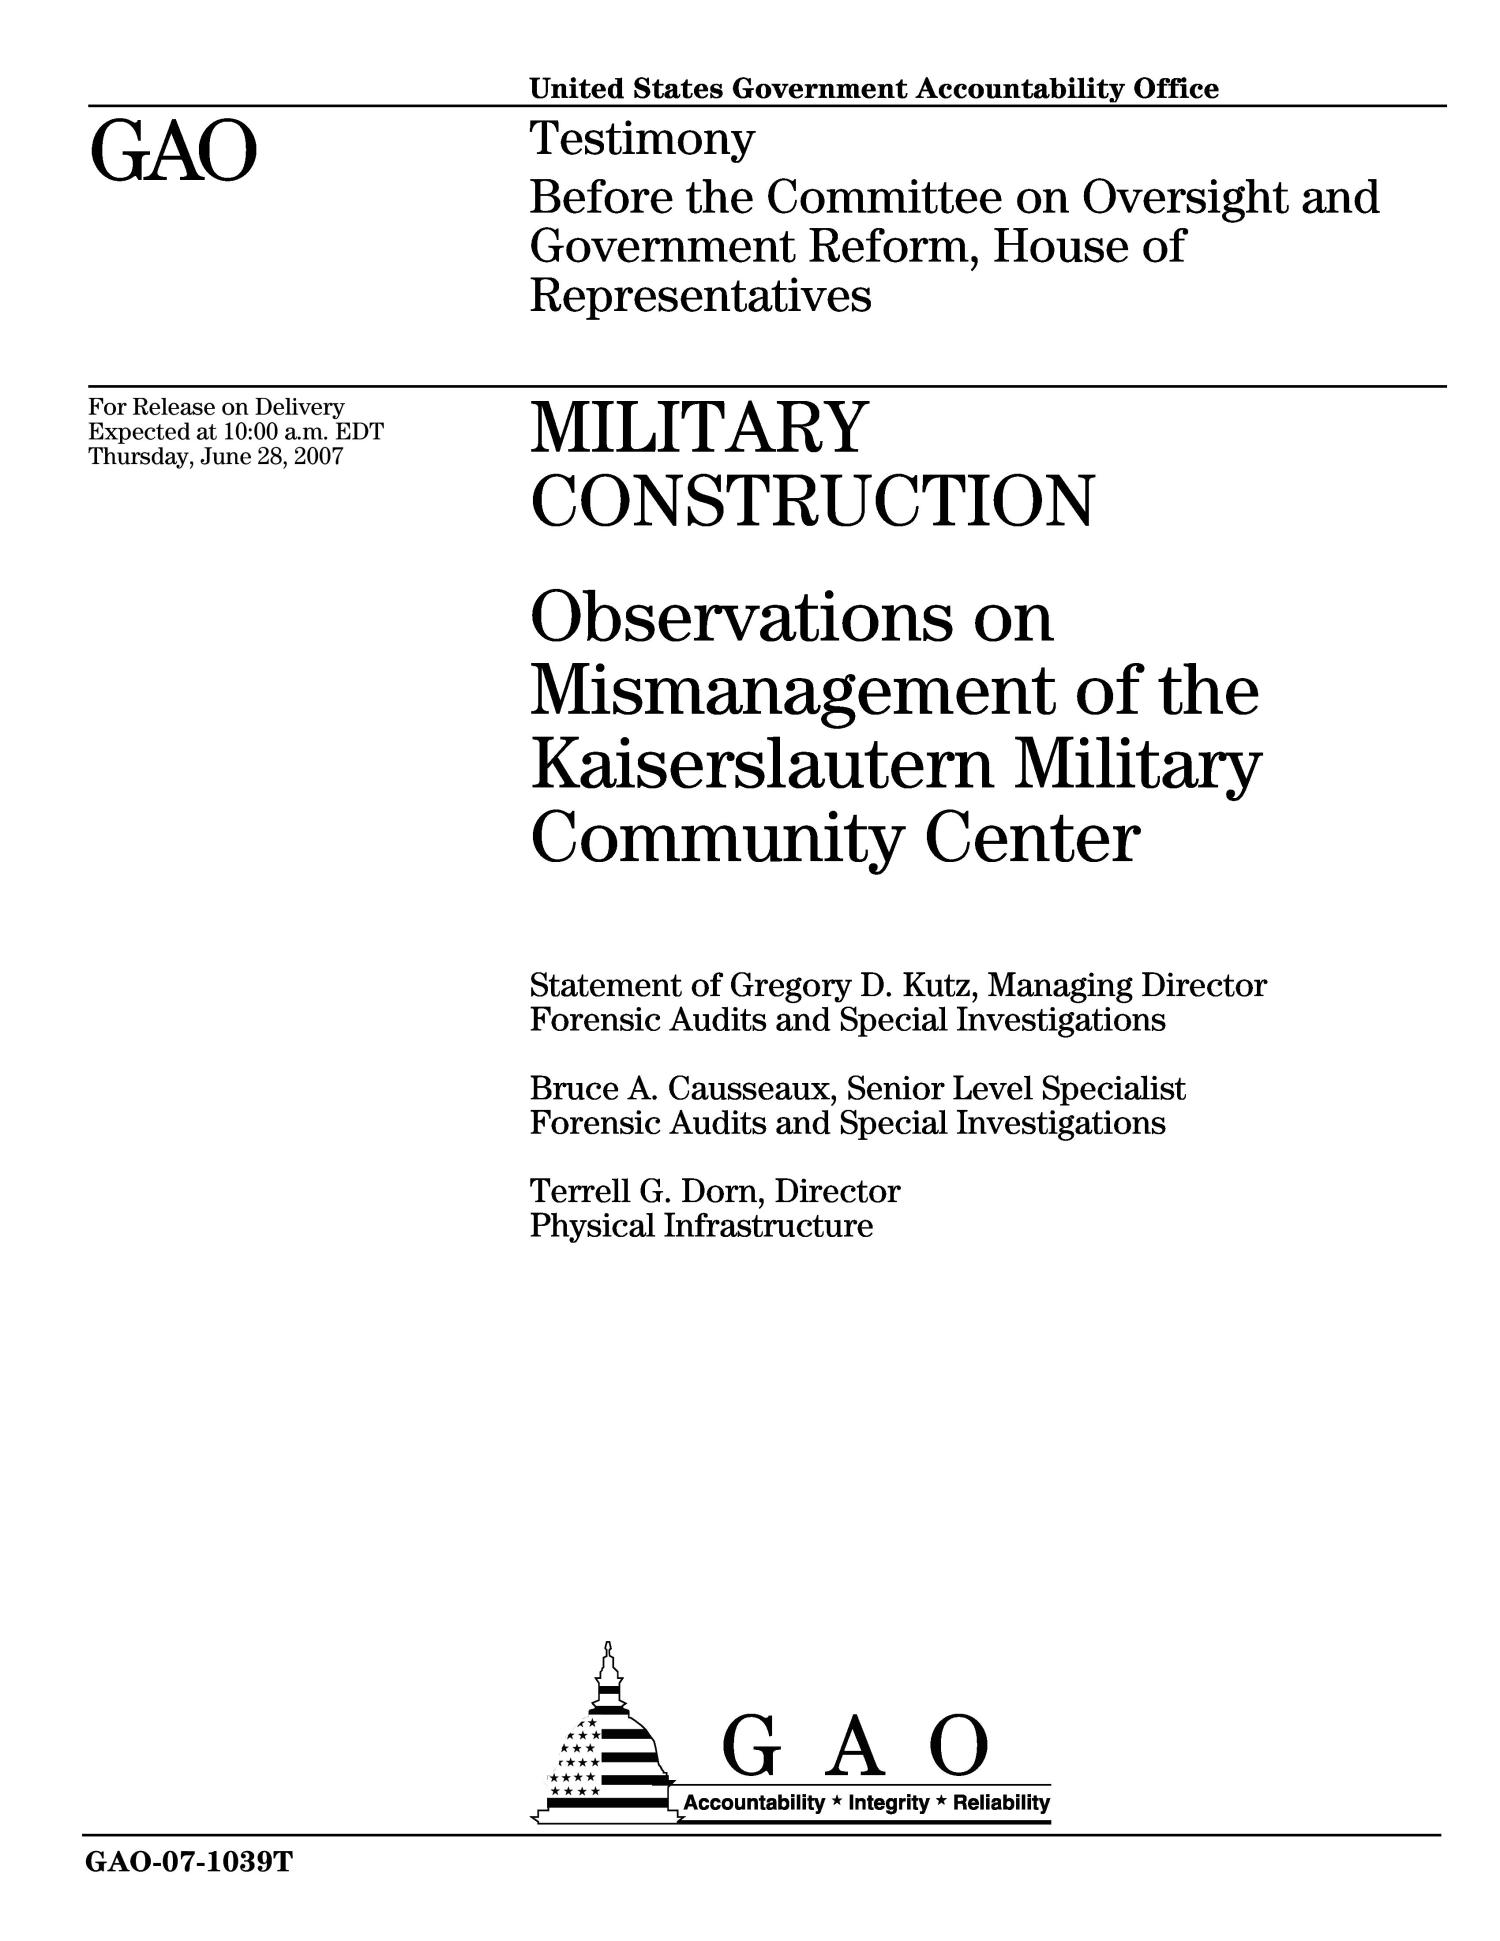 Military Construction: Observations on Mismanagement of the Kaiserslautern Military Community Center
                                                
                                                    [Sequence #]: 1 of 26
                                                